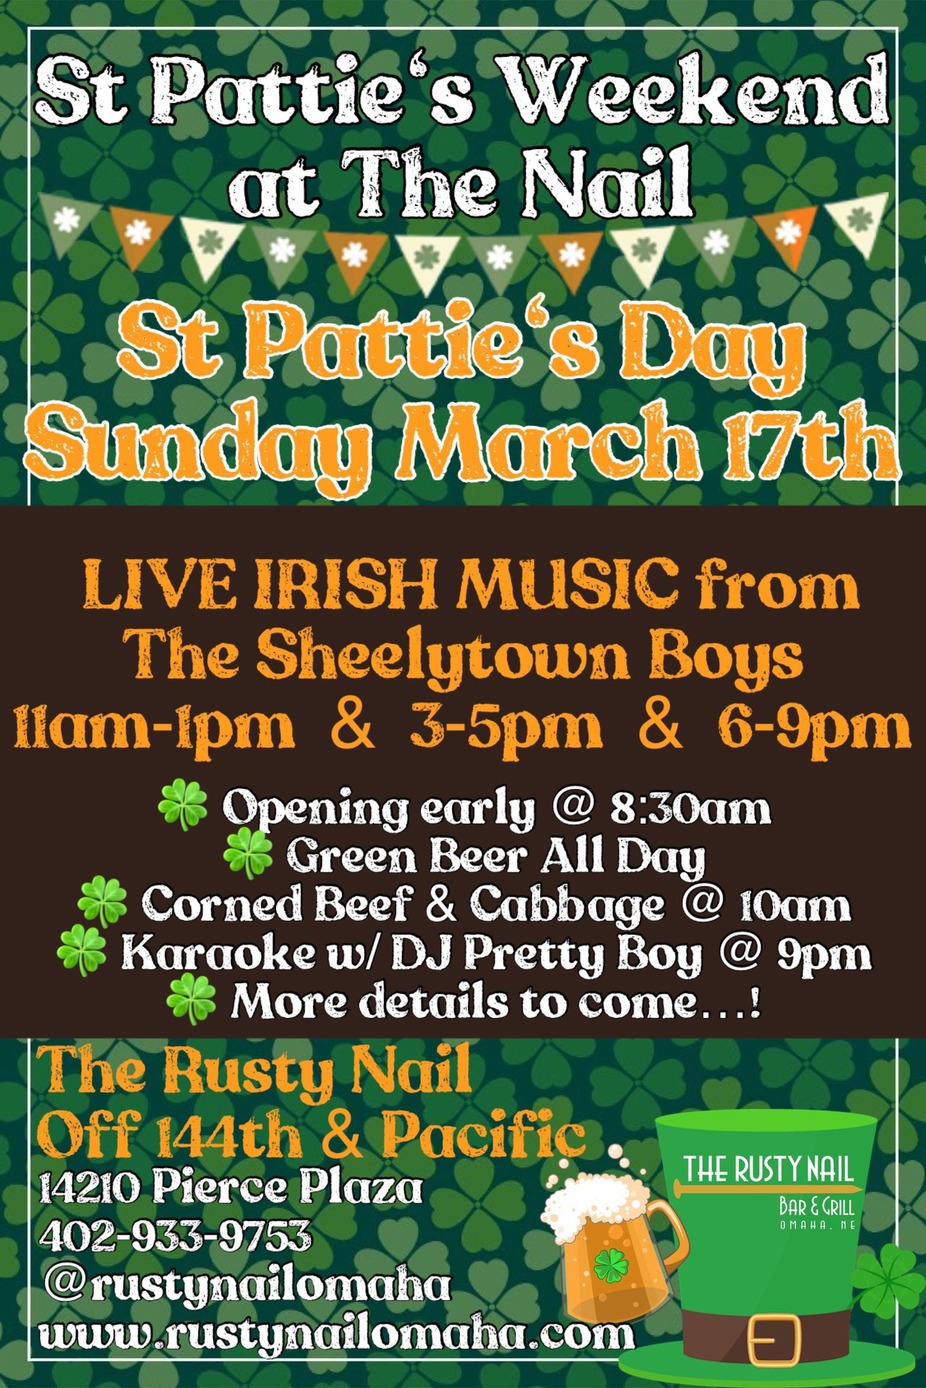 St Pattie’s Day @ The Nail - Live Irish Music w/ The Sheelytown Boys @ 11, 3, and 6! event photo